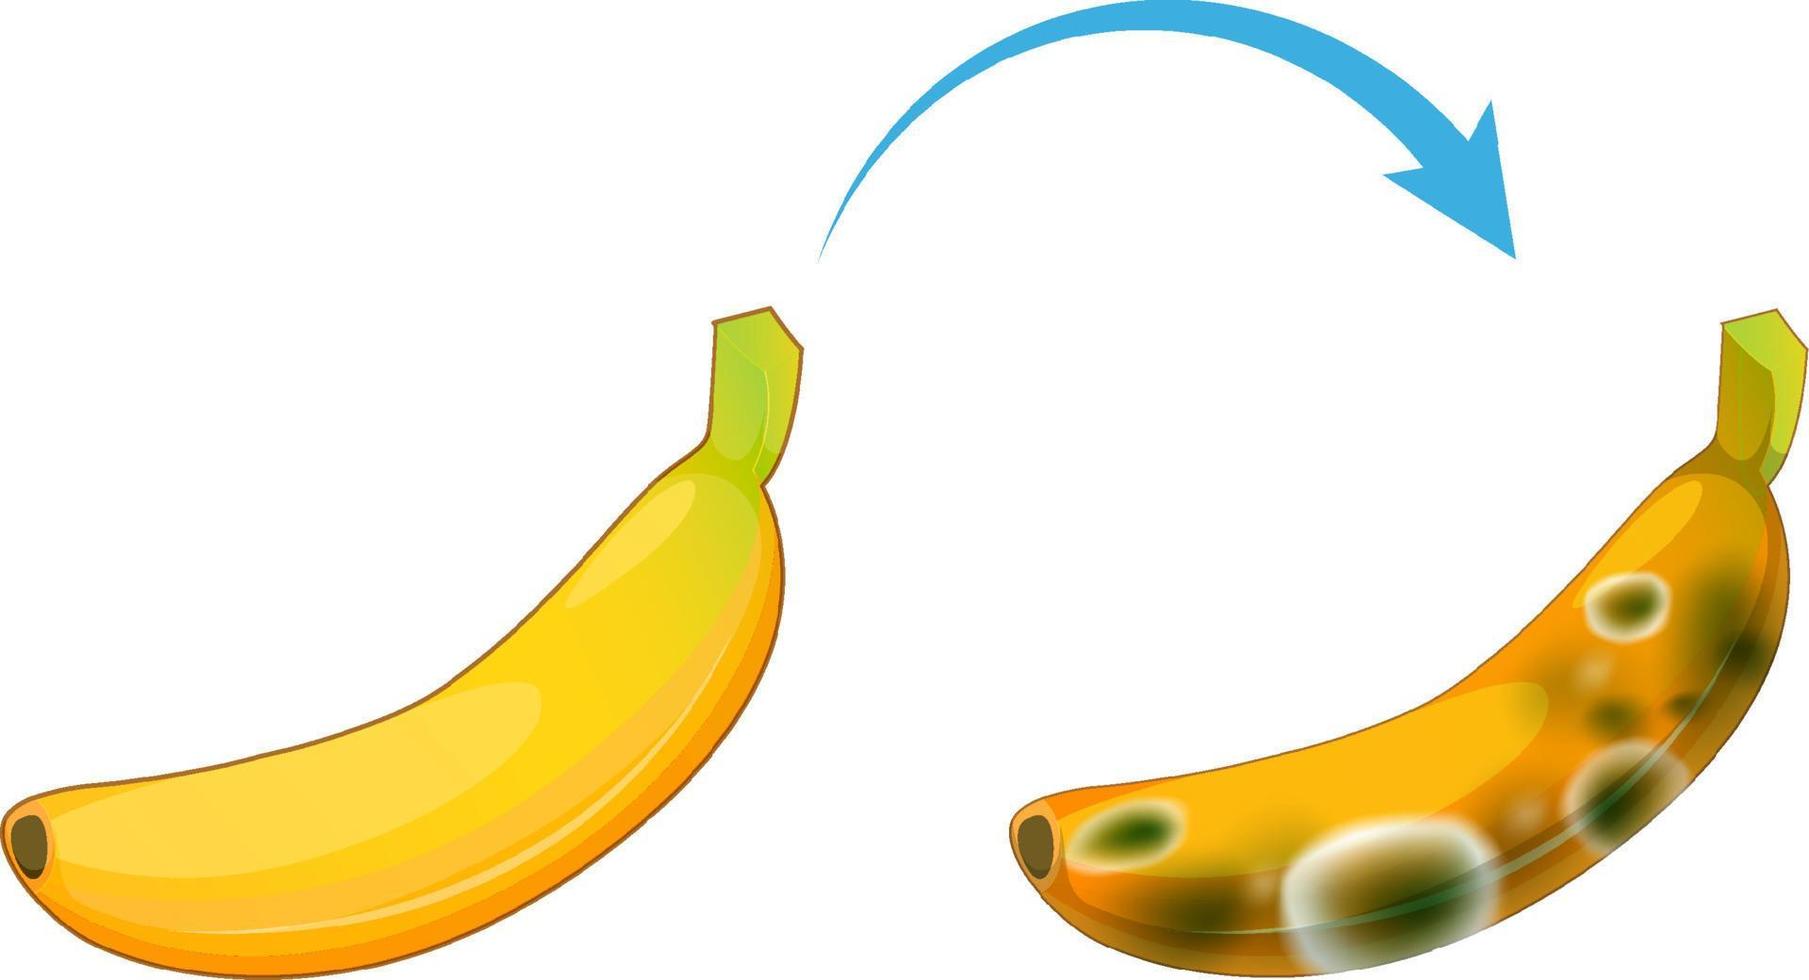 Inedible decomposed banana with mould vector